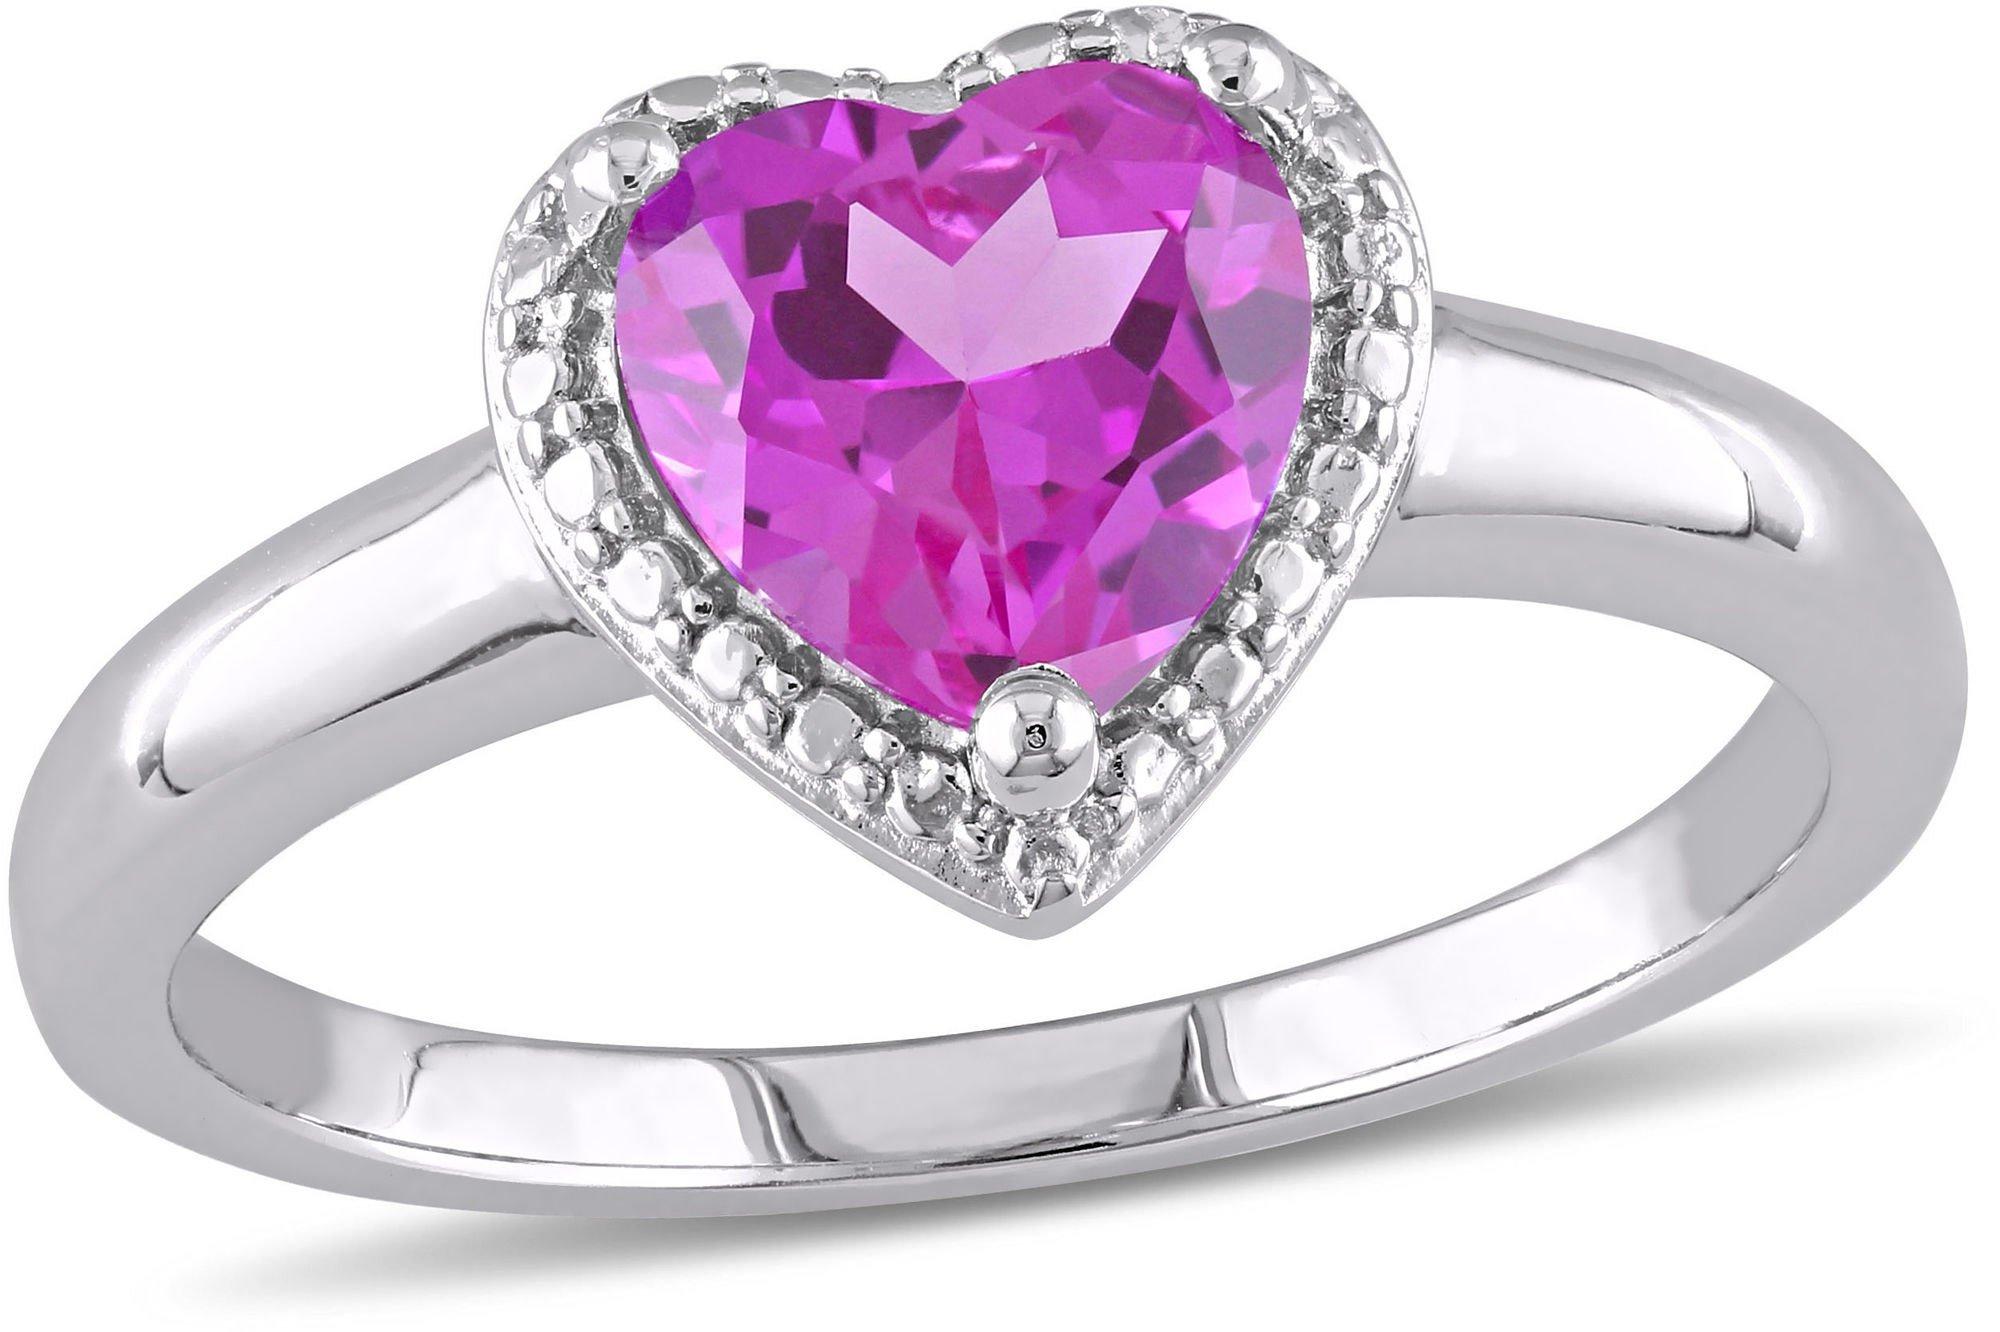 1 1/2-ct. Pink Heart Shaped Sapphire Ring